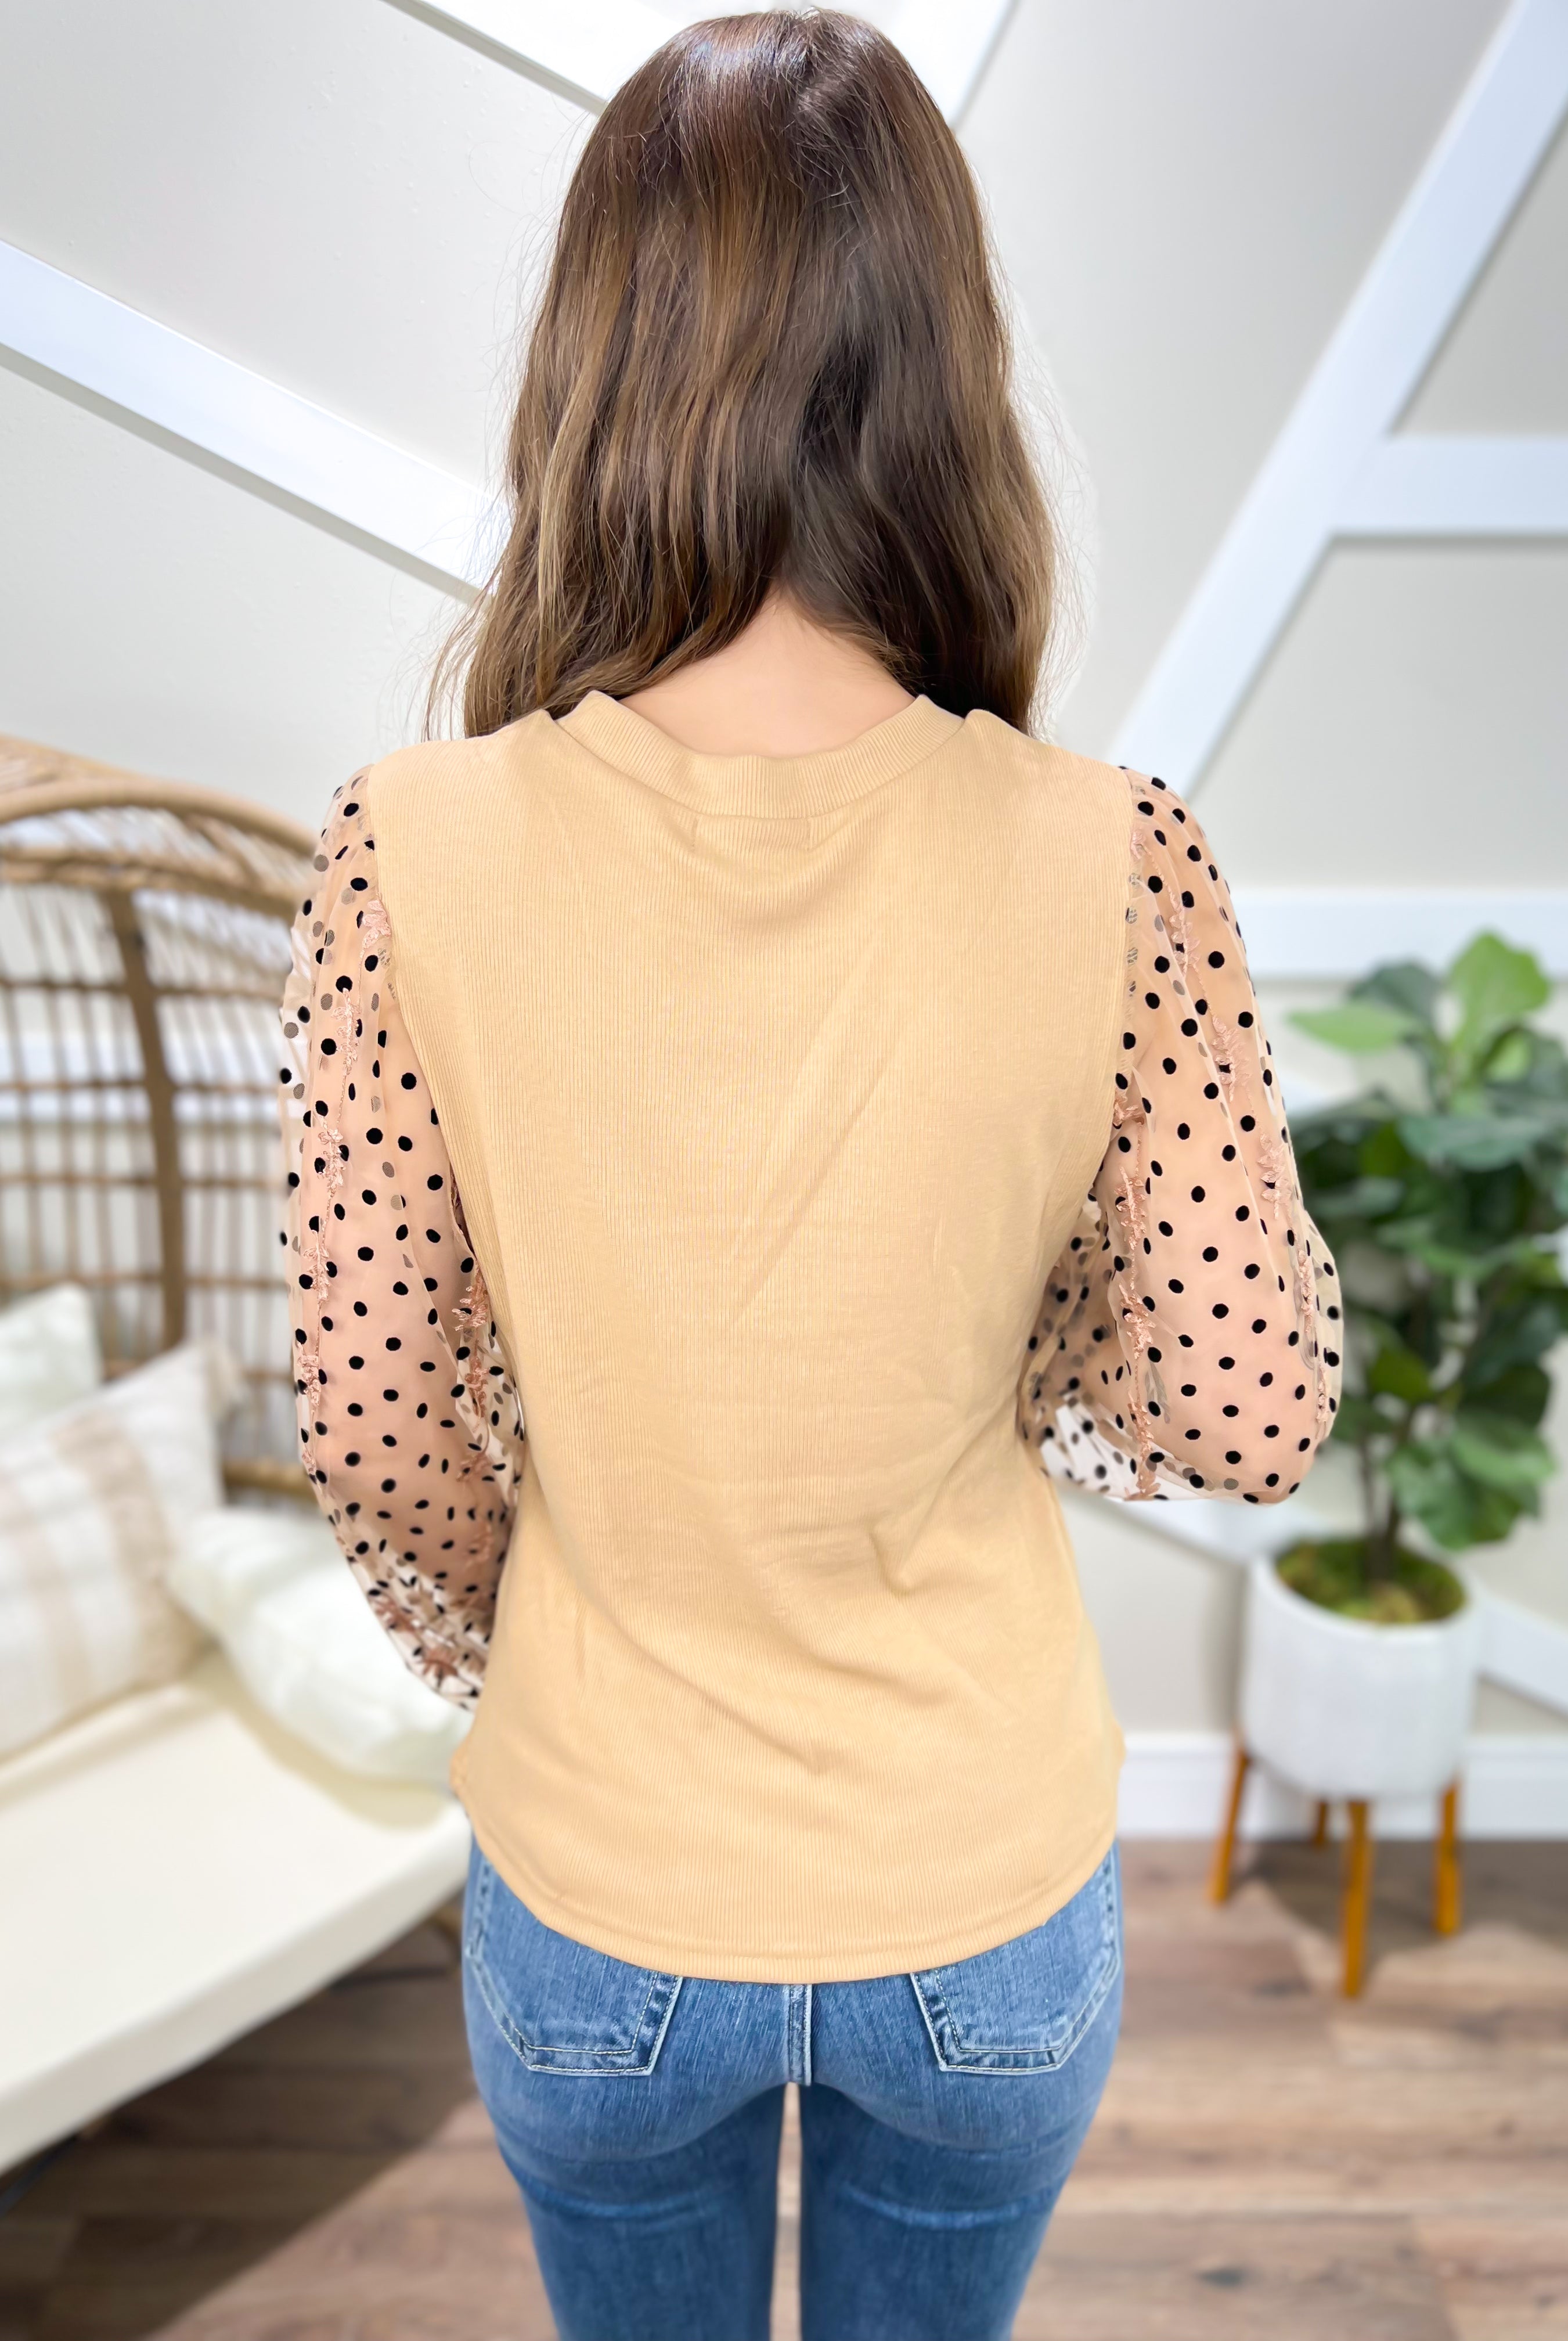 Rock It Polkadot Top-120 Long Sleeve Tops-Polagram-Heathered Boho Boutique, Women's Fashion and Accessories in Palmetto, FL